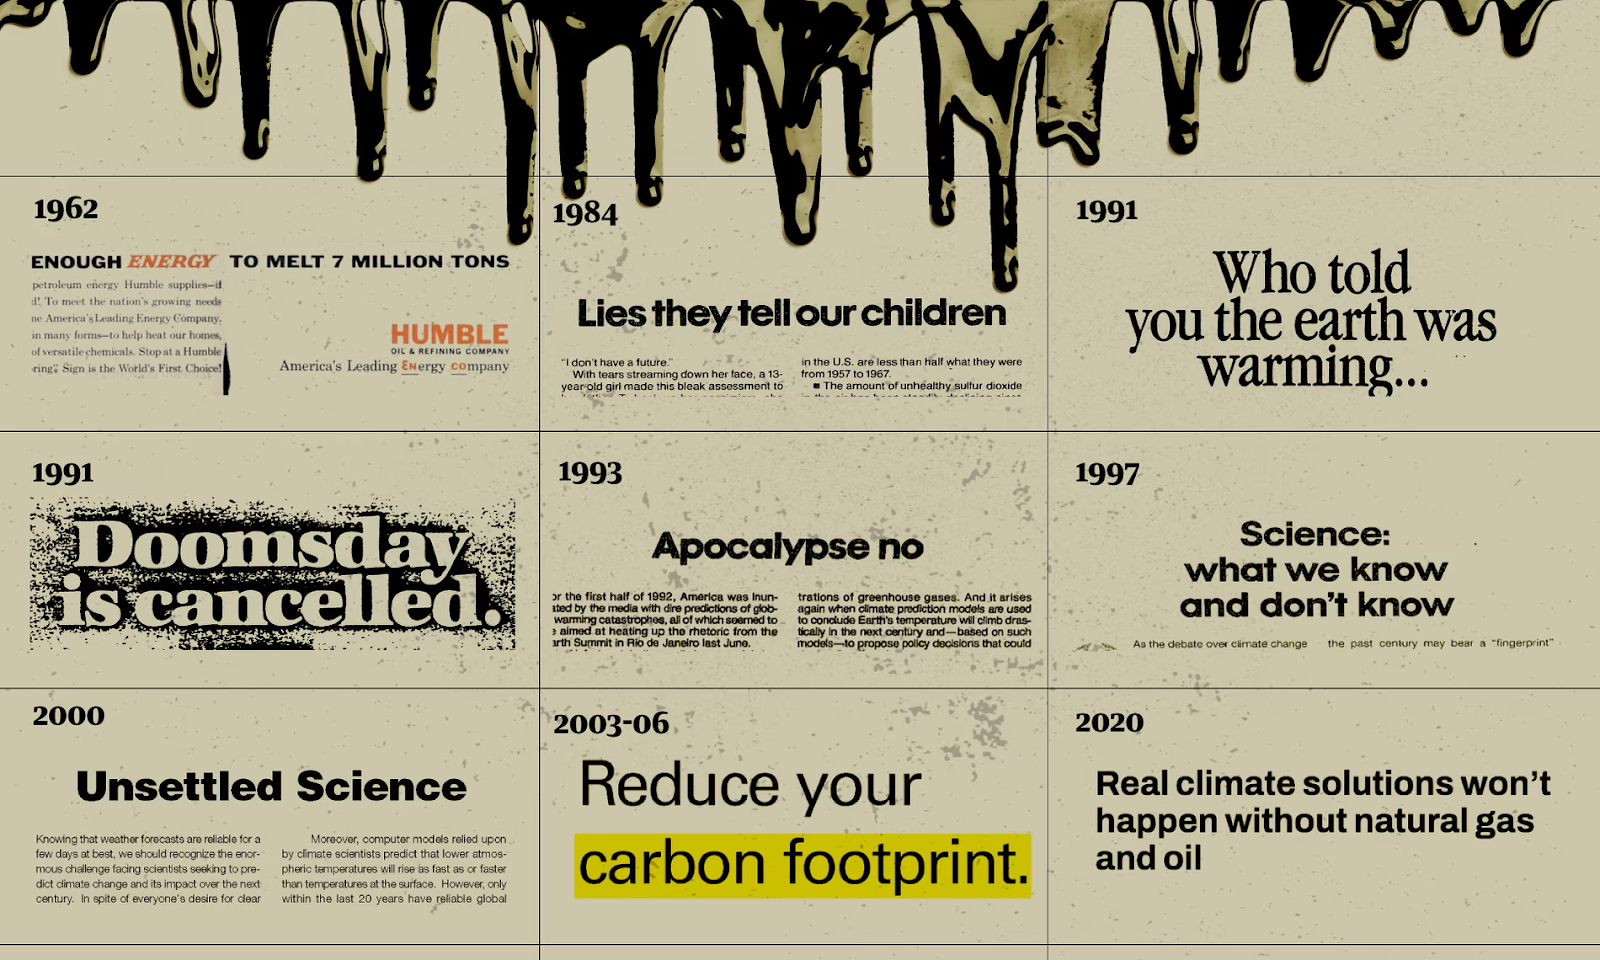 Oil industry climate change propaganda from 1962 to 2020